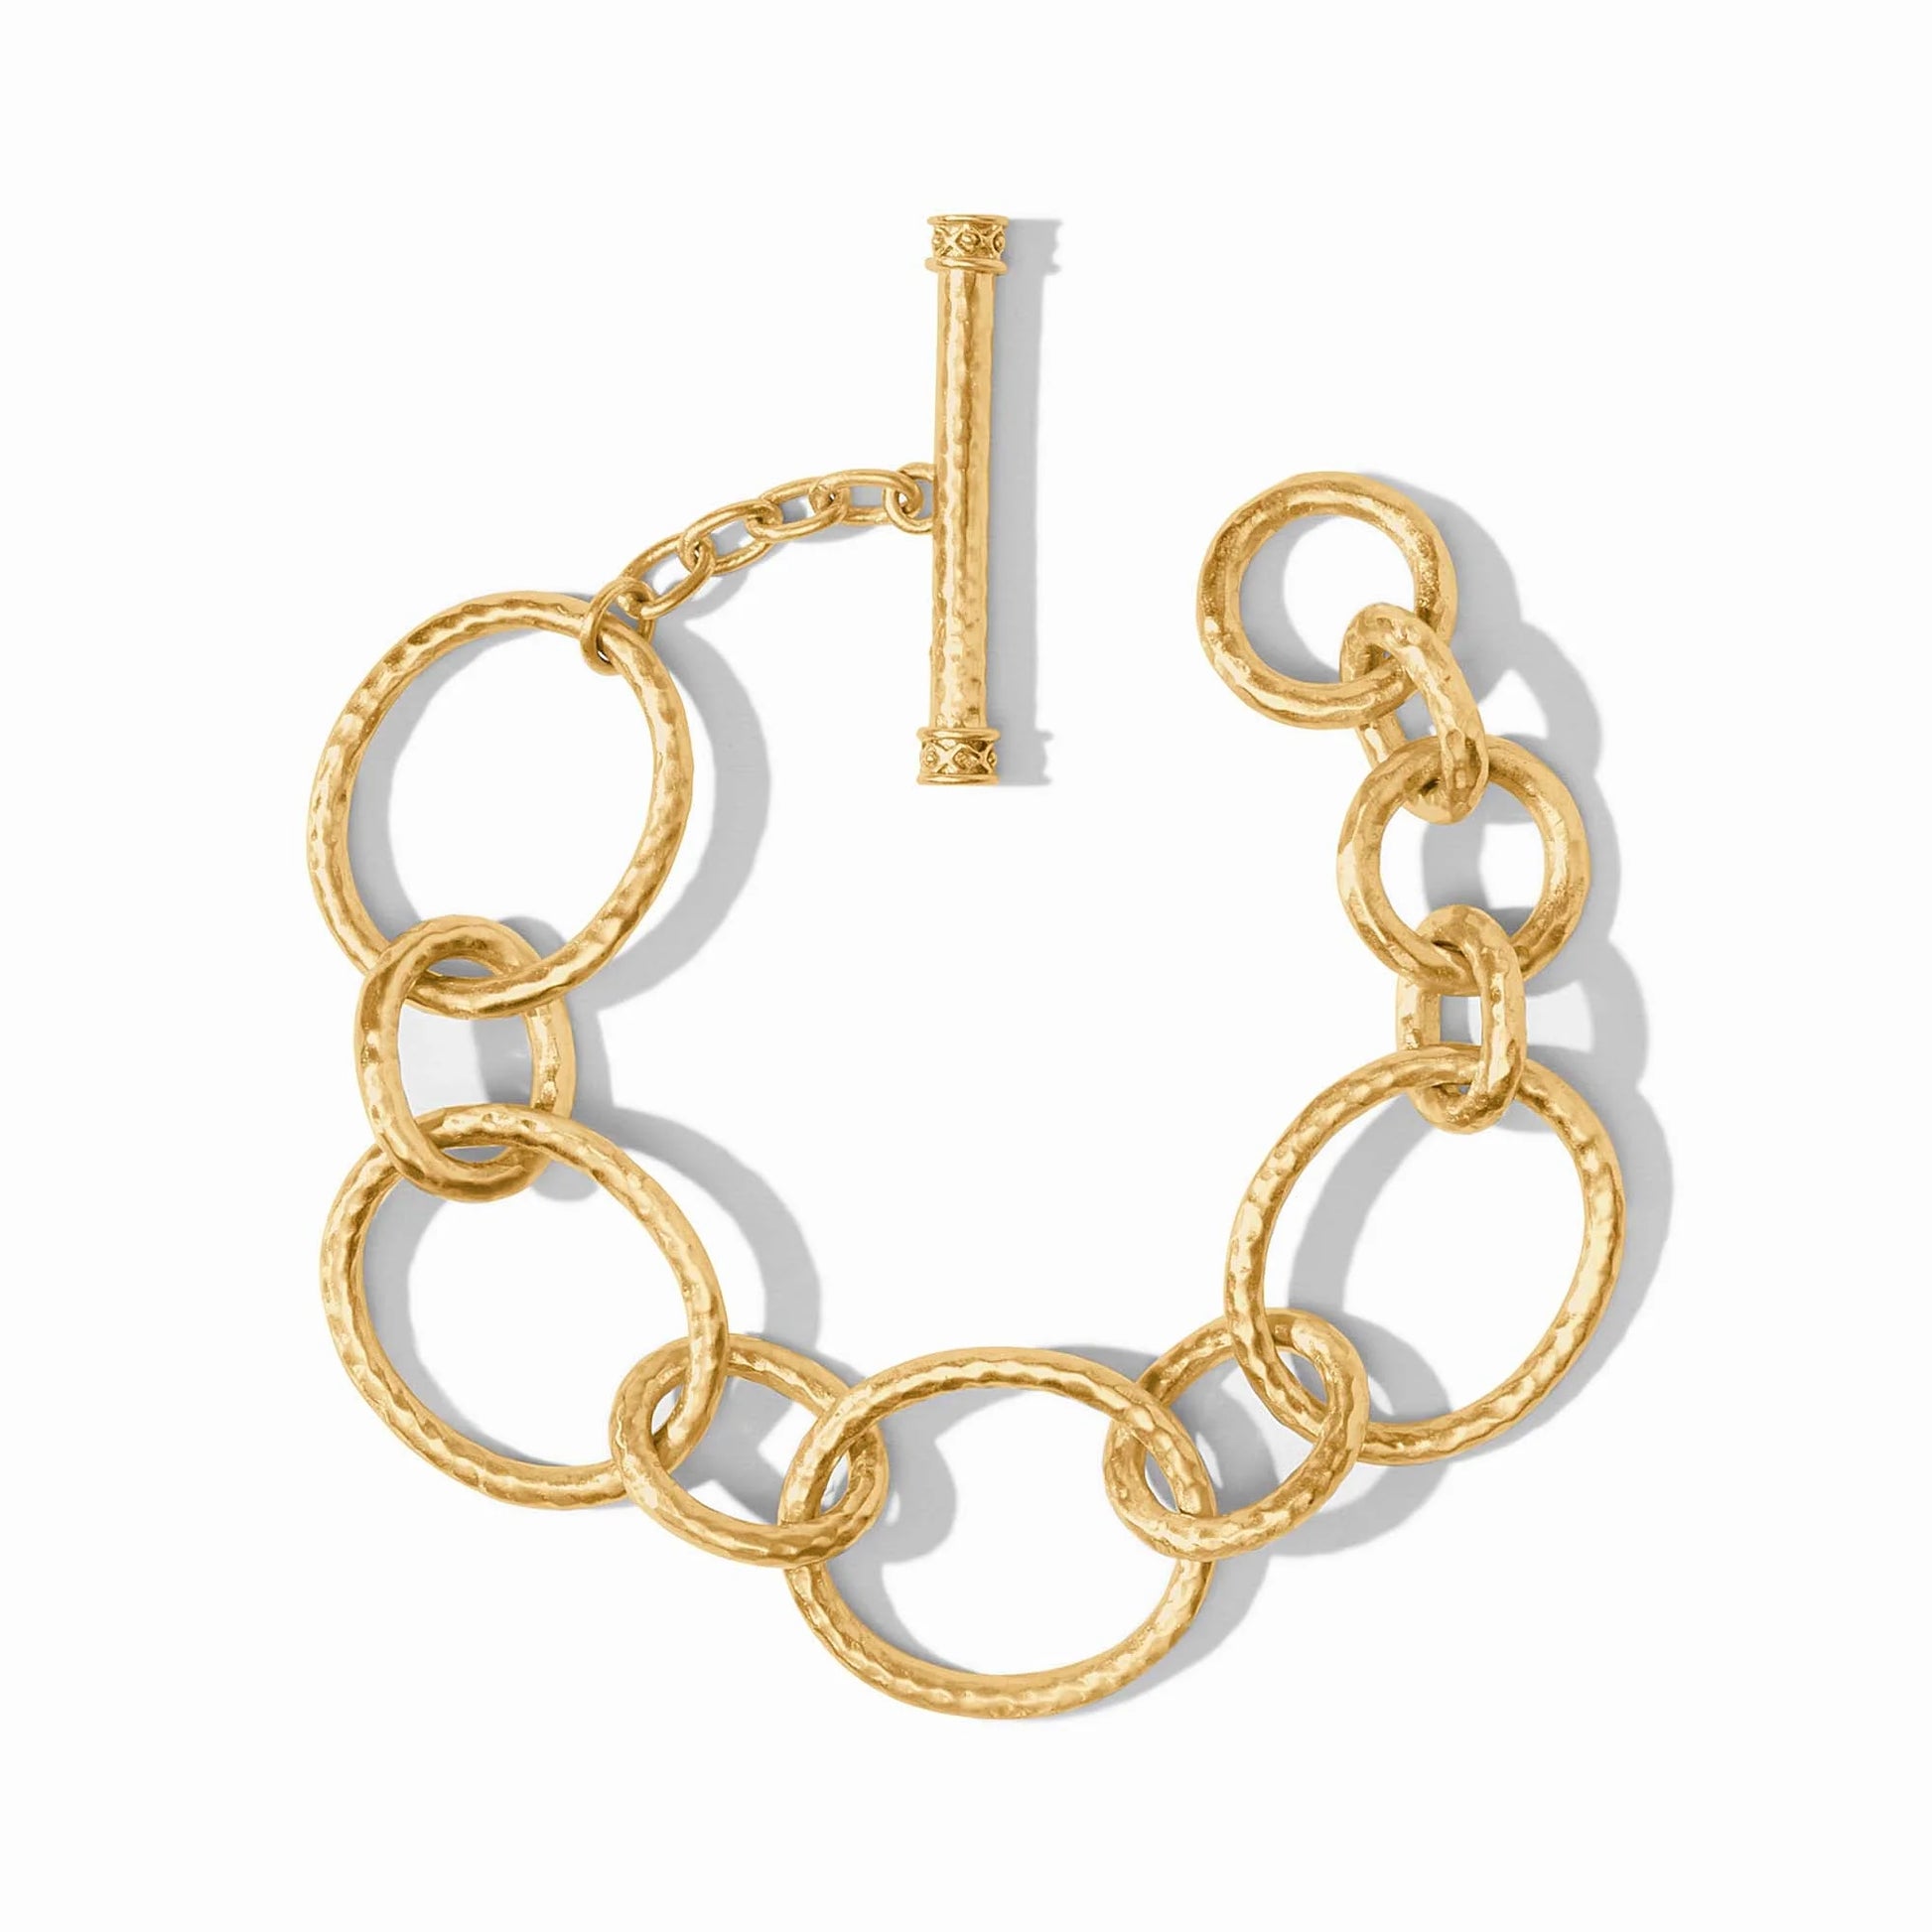 Catalina Light Link Bracelet in Gold - The French Shoppe